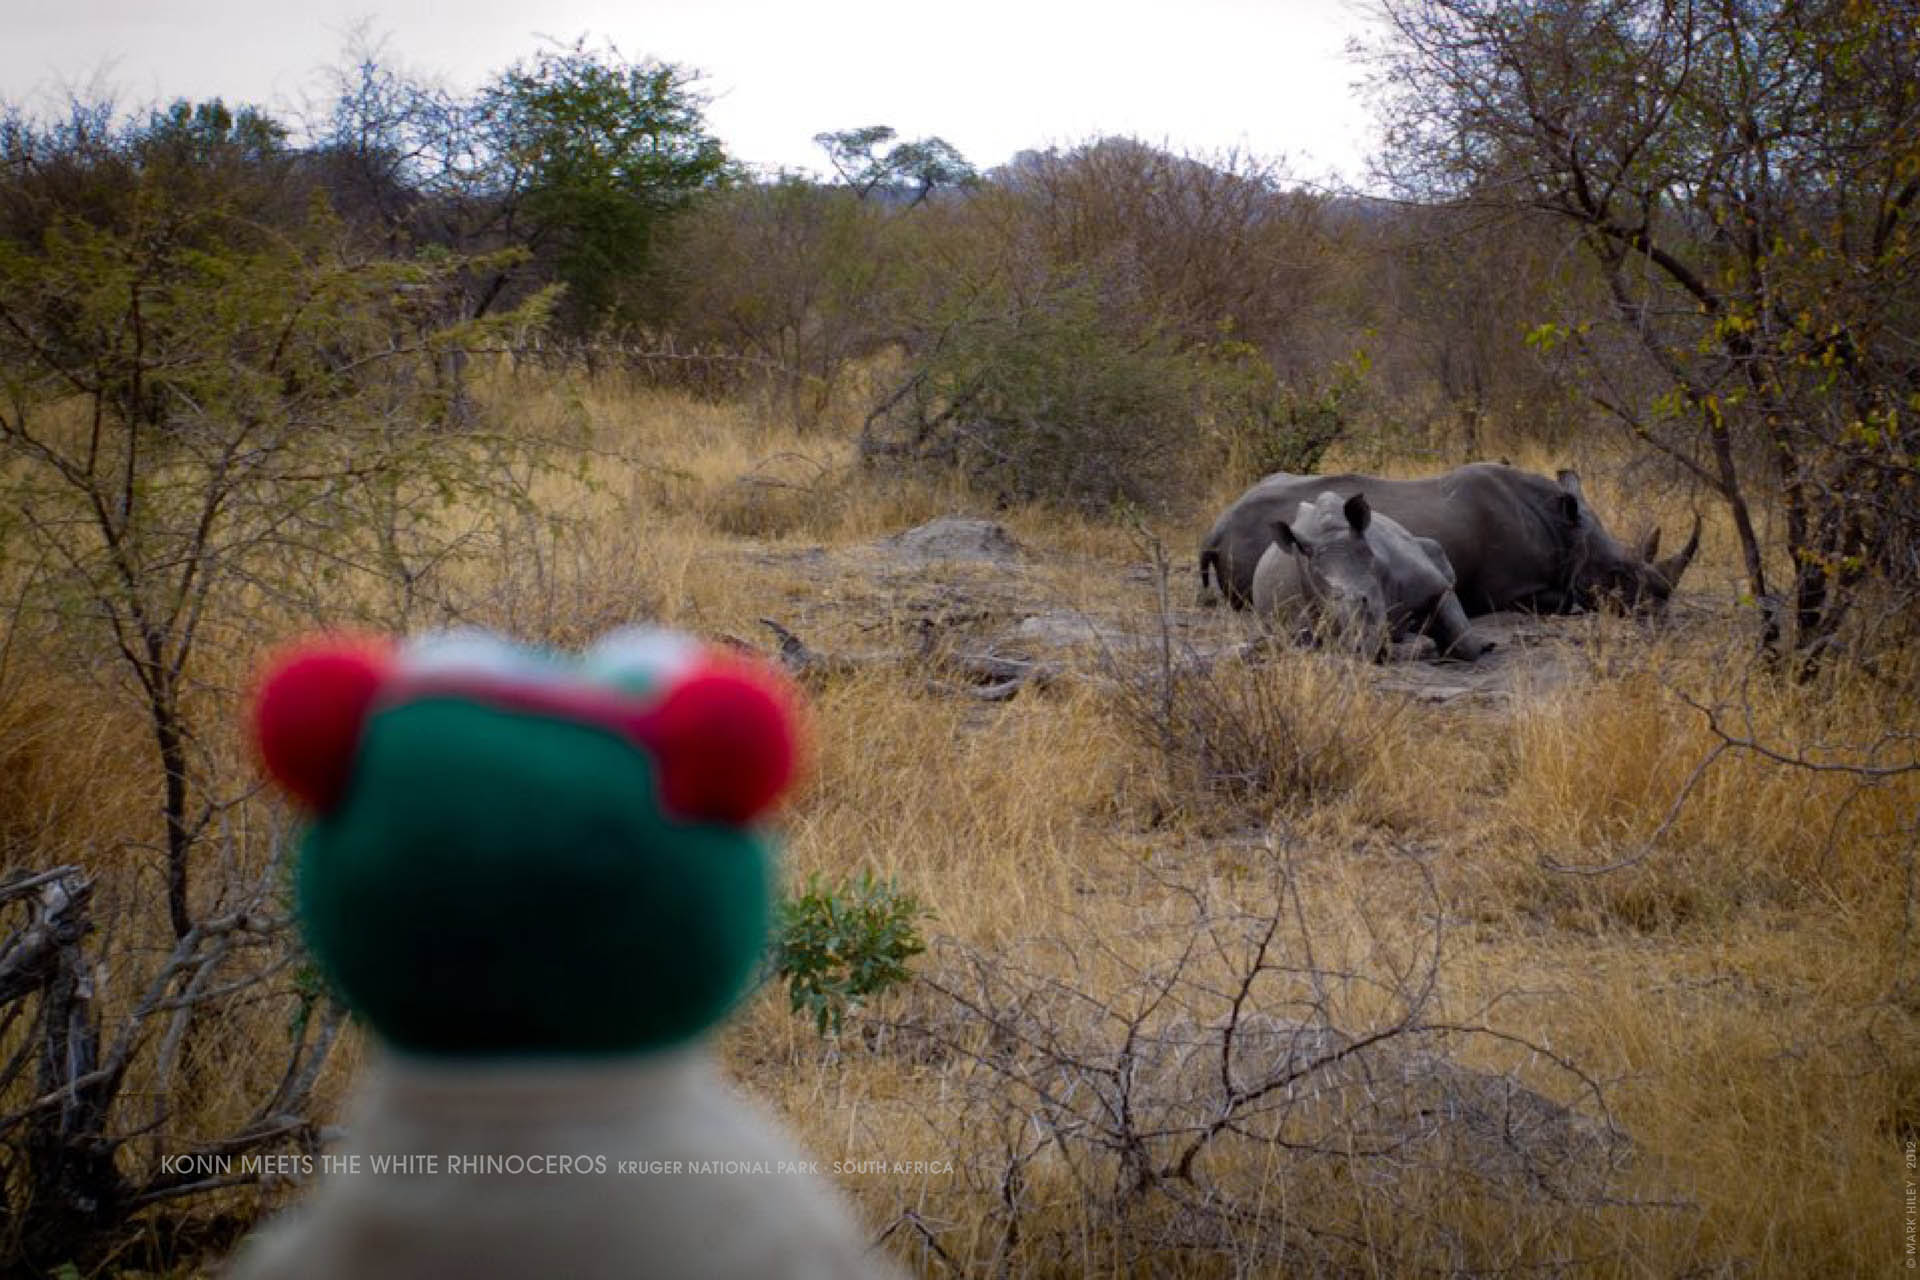 Mark Hiley's KONN THE FROG meets the white Rhinoceros, Kruger National Park, South Africa